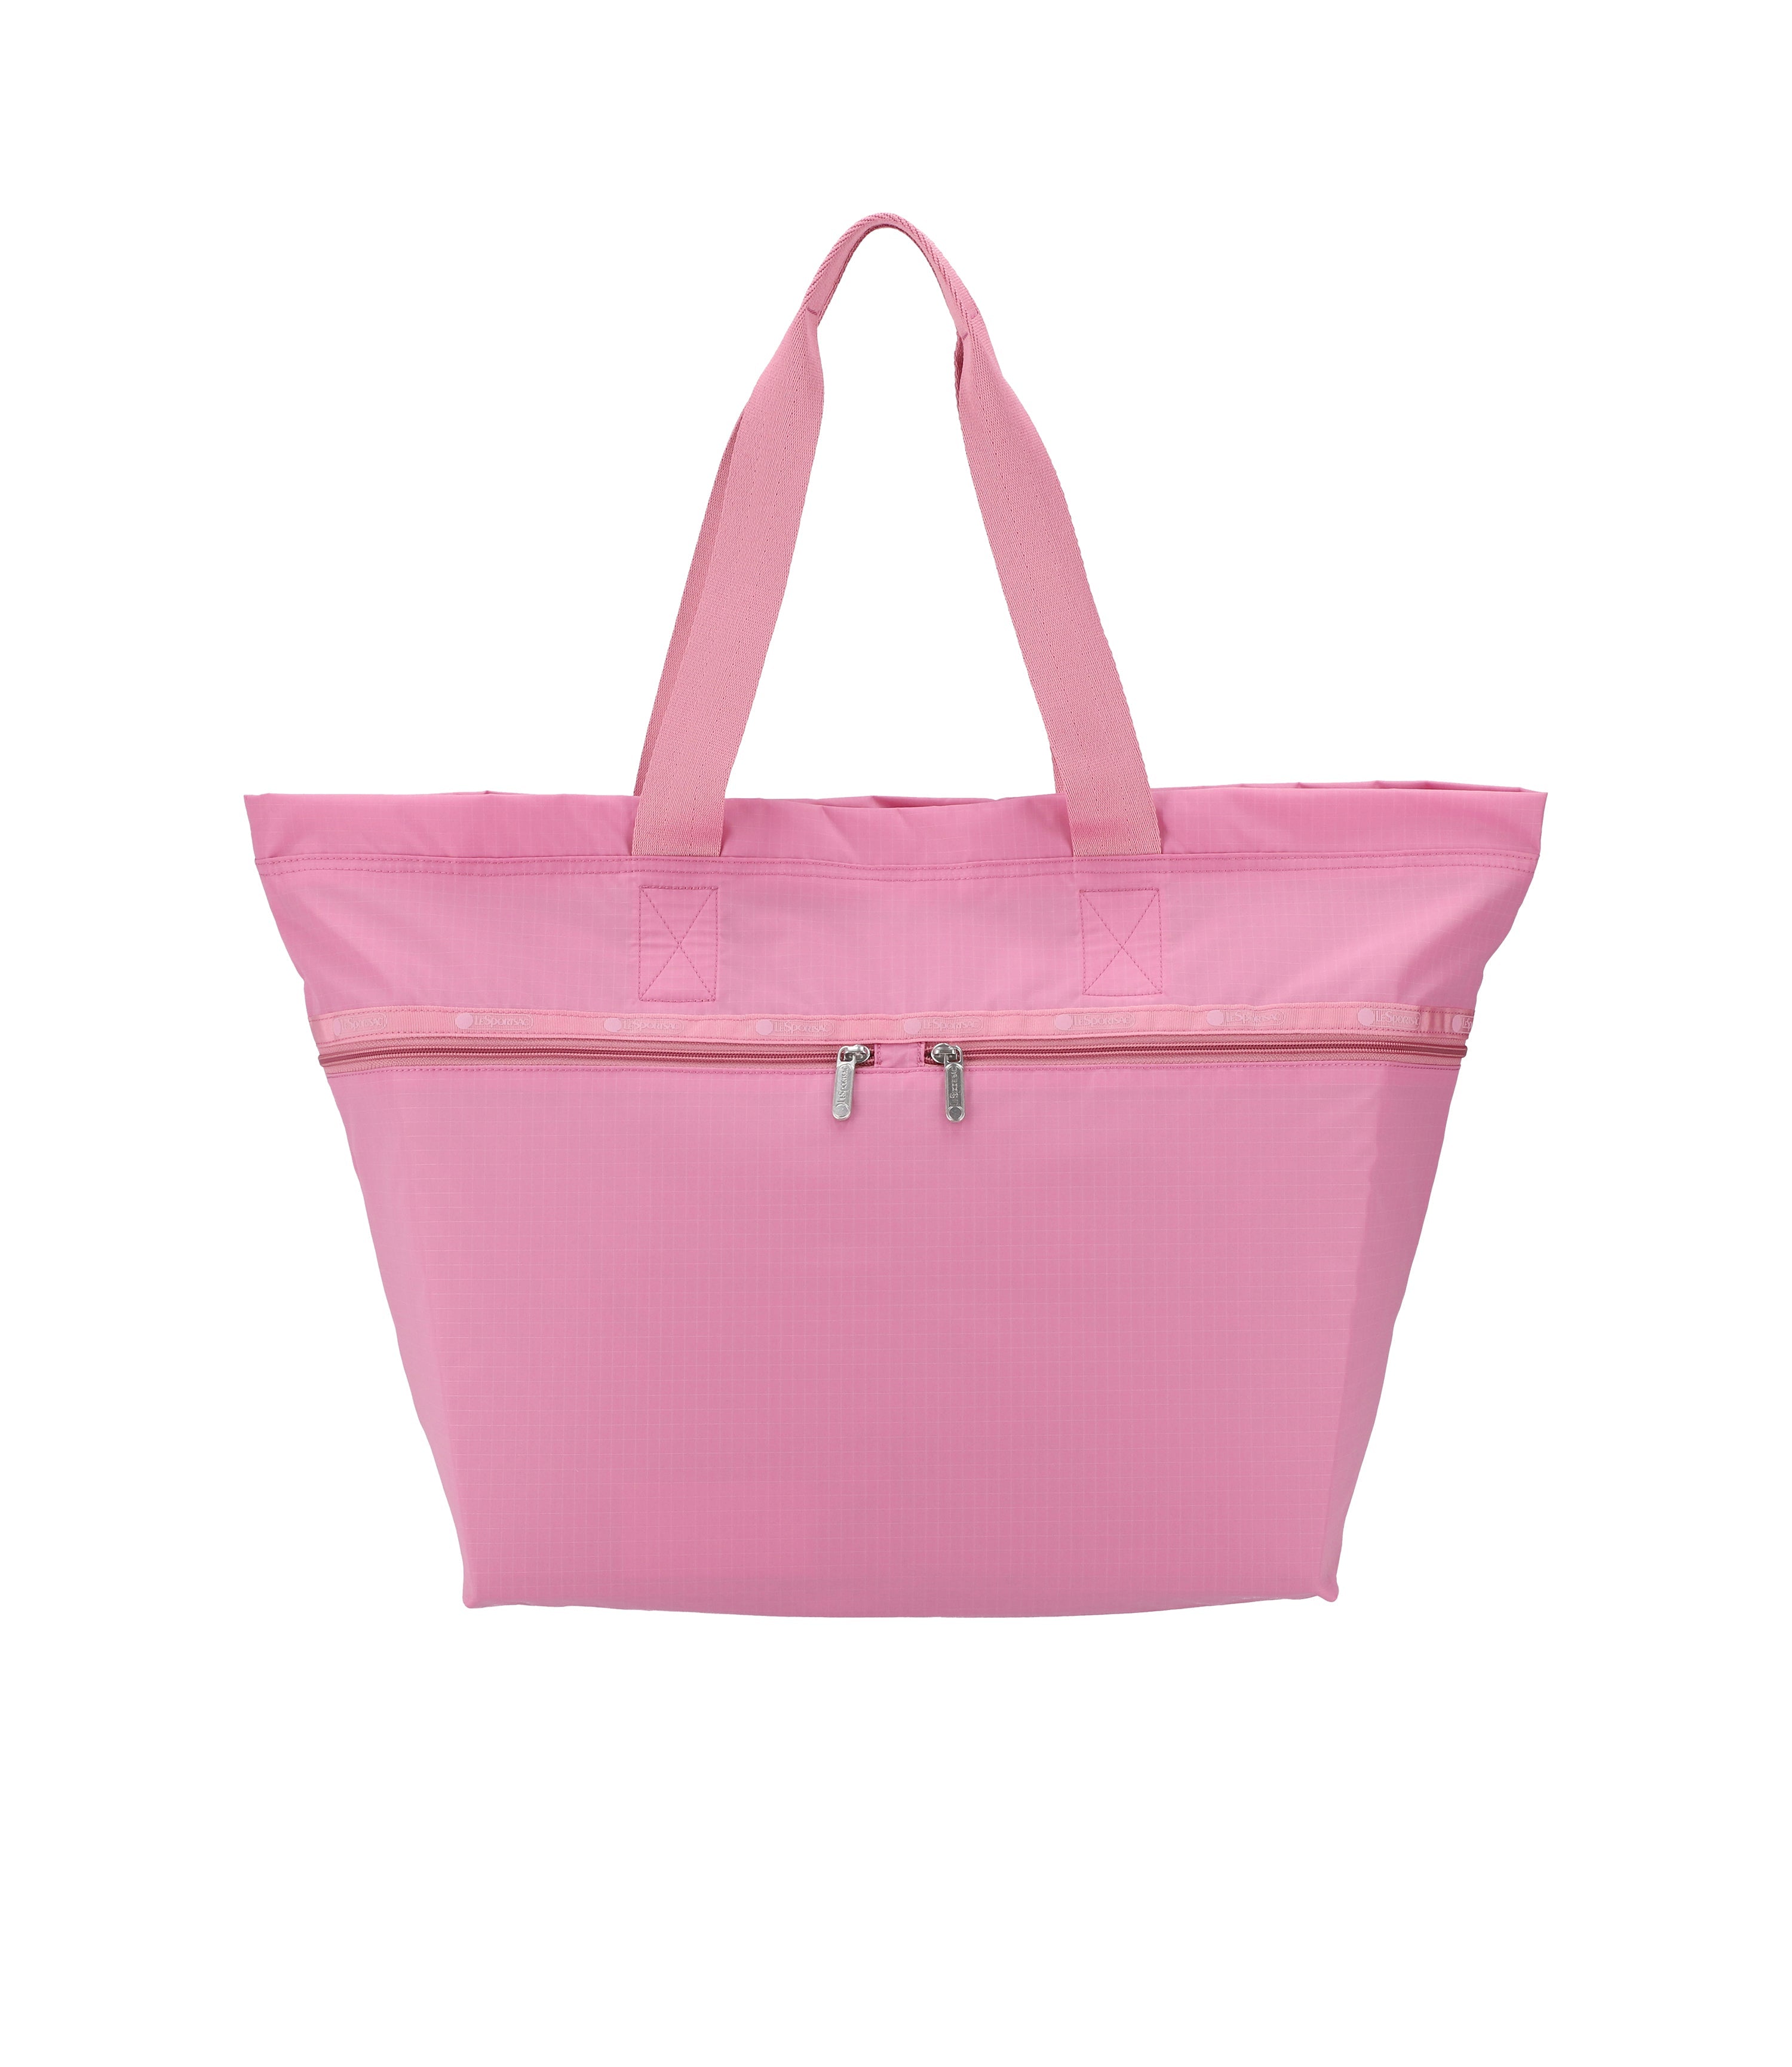 Carlin Zip Top Tote Bag - Cashmere Rose solid